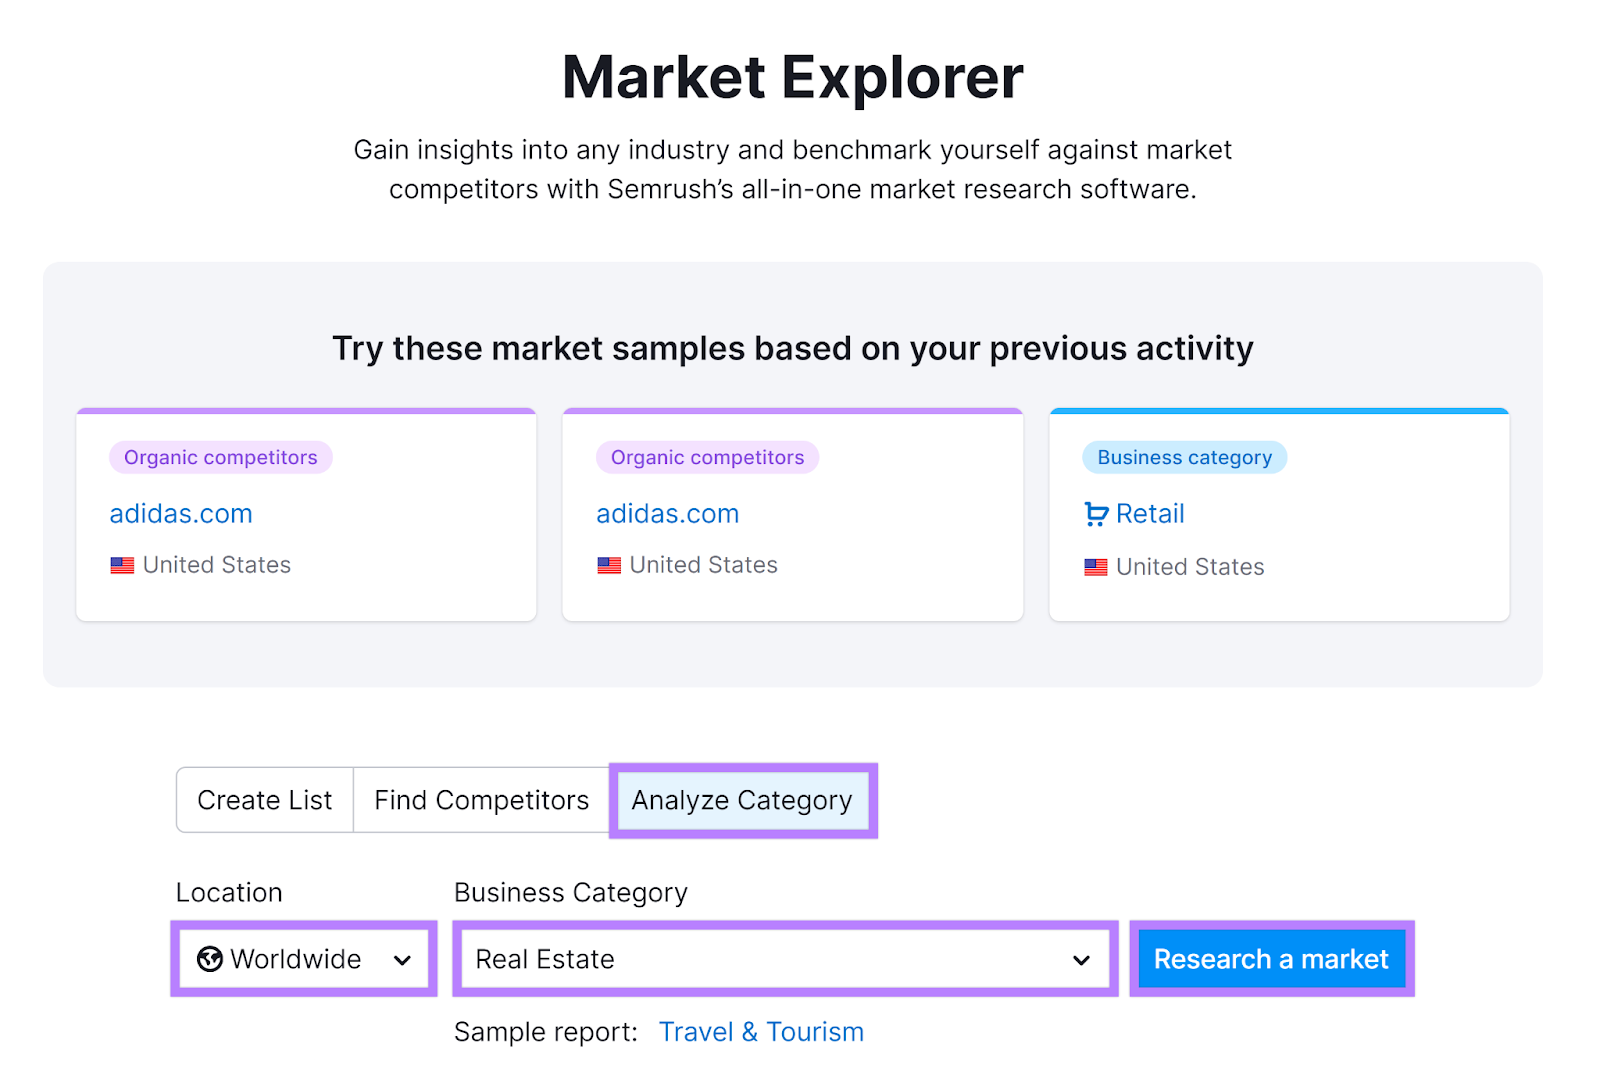 Market Explorer tool page with Analyze Category, Location, Business Category, and Research a market highlighted.